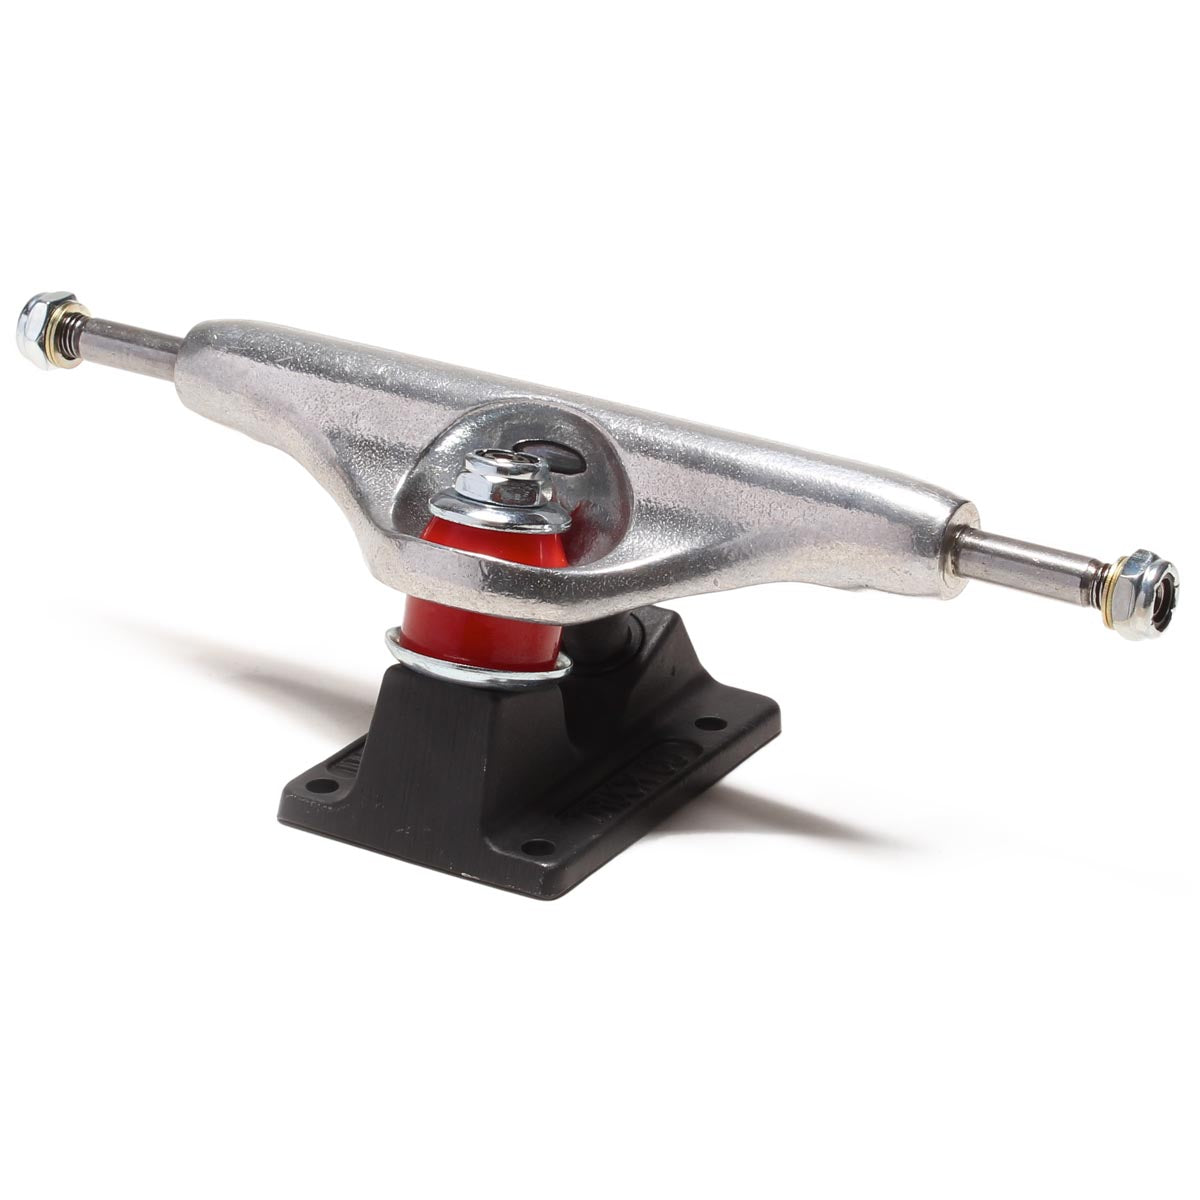 Independent Stage 11 Hollow Standard Skateboard Trucks - Silver/Ano Black - 144mm image 2